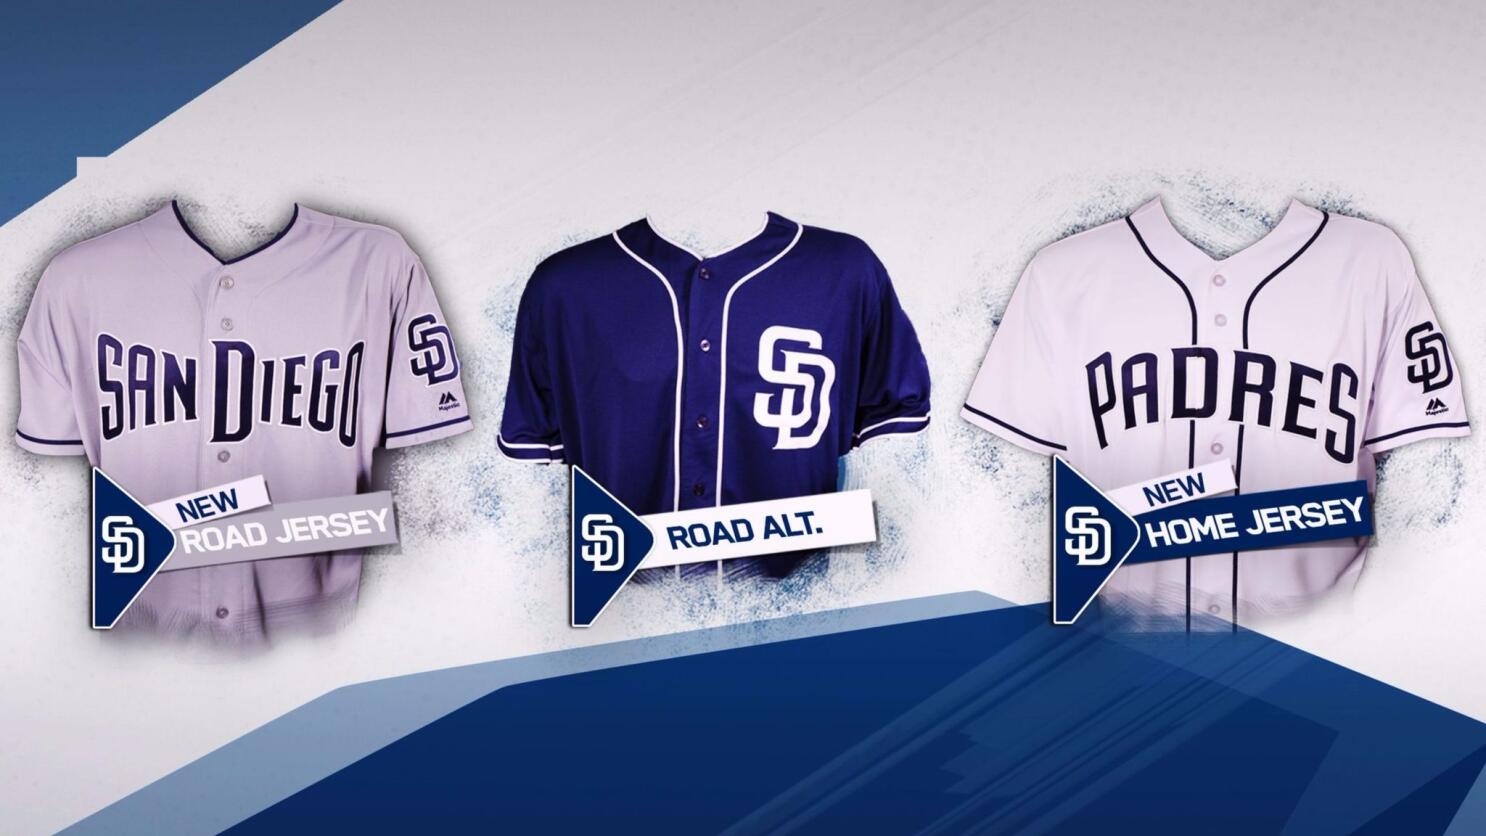 San Diego Padres unveil new uniforms with brown-and-gold color scheme - ESPN